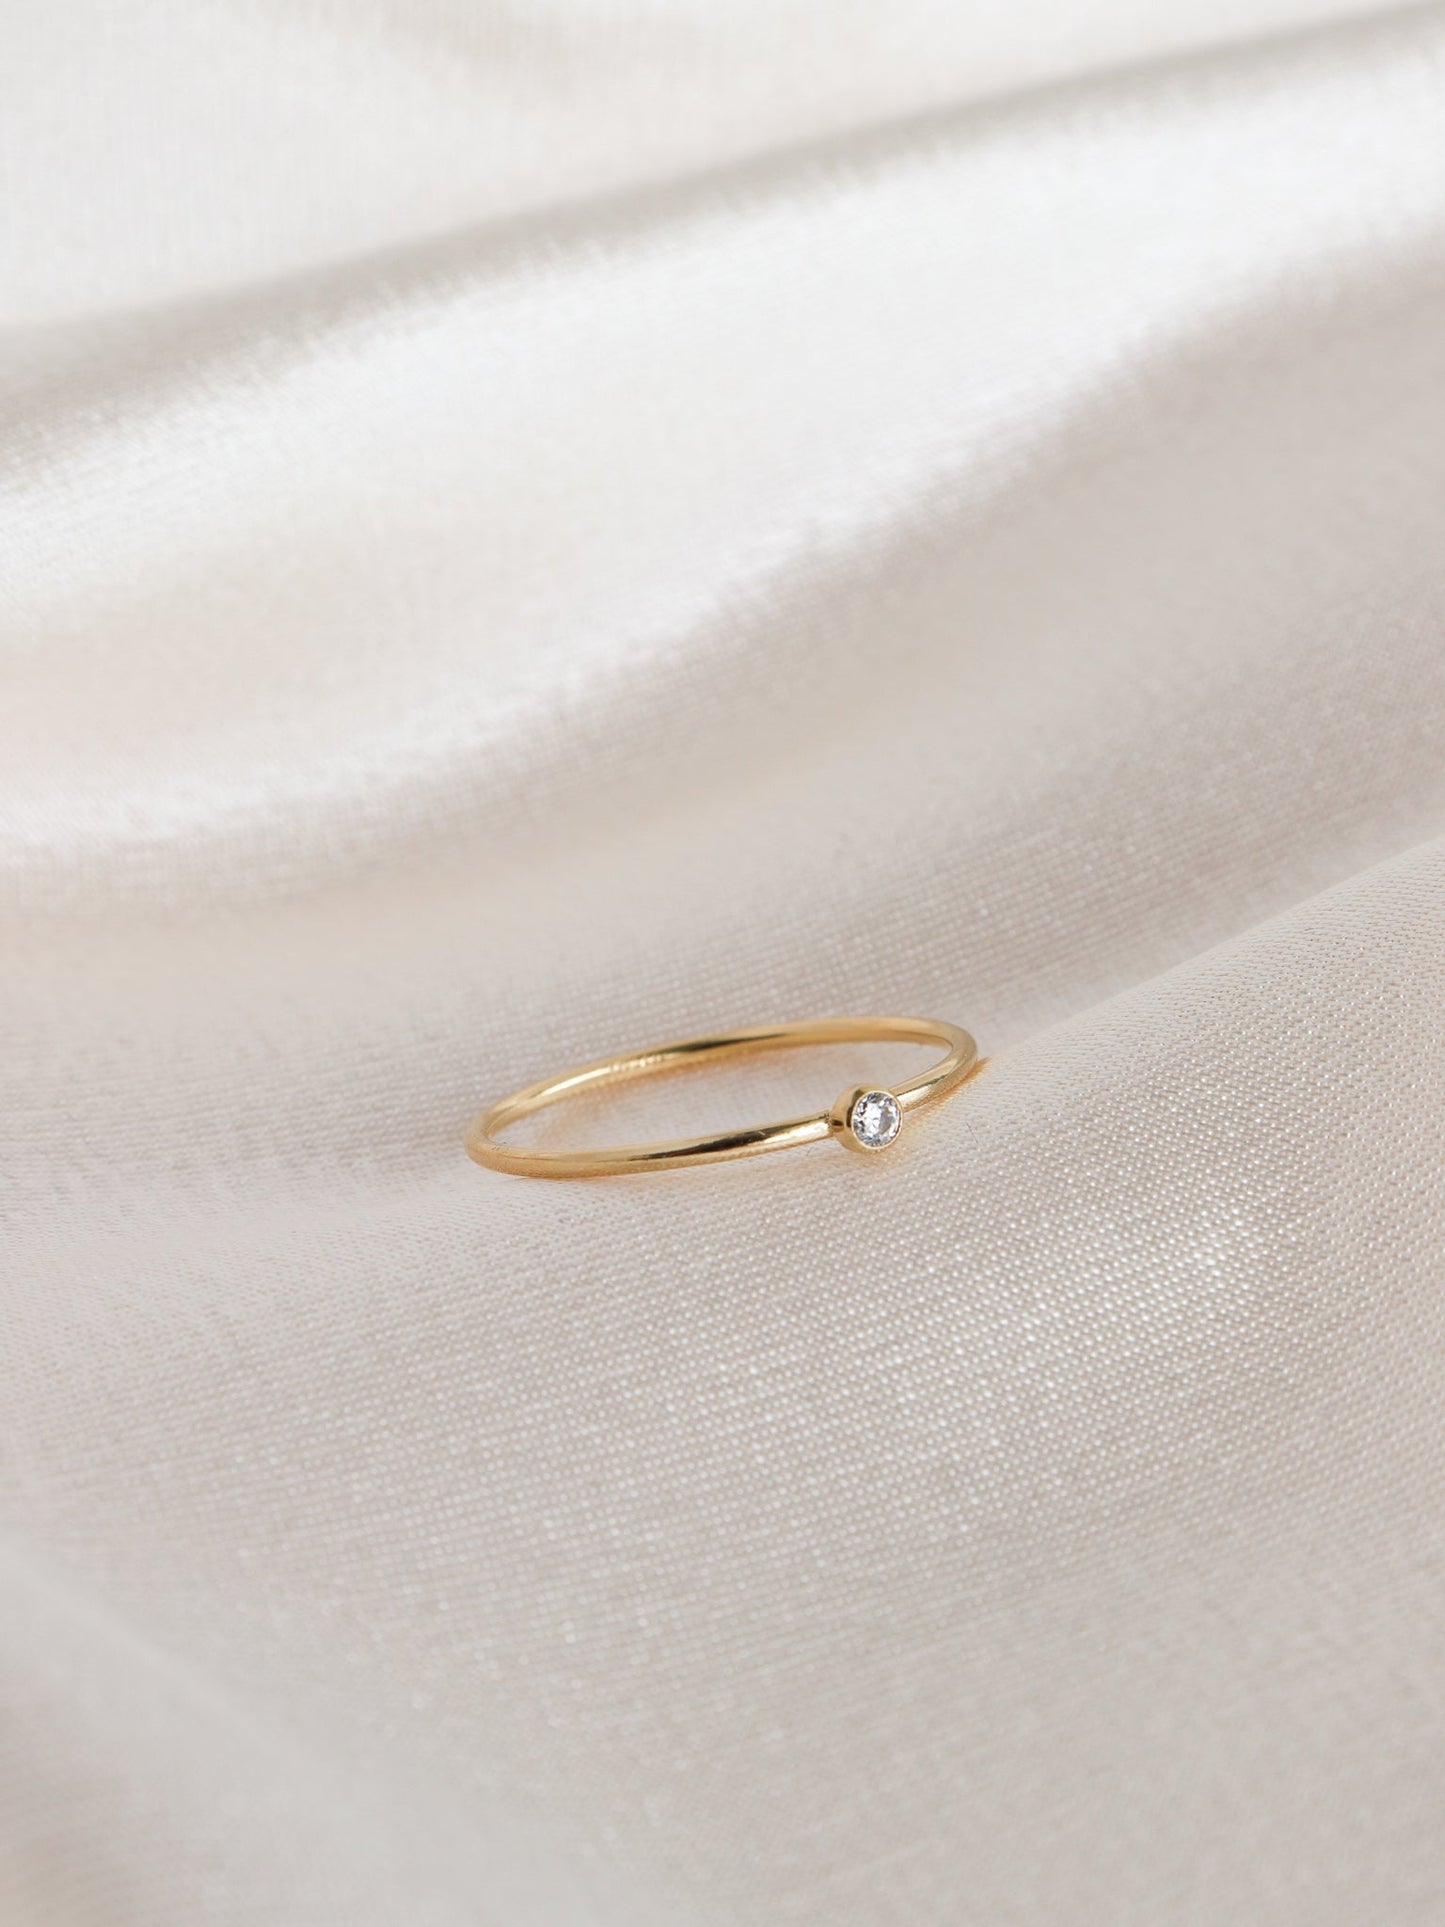 Dainty CZ - Gold Filled Stacking Ring - Gemlet